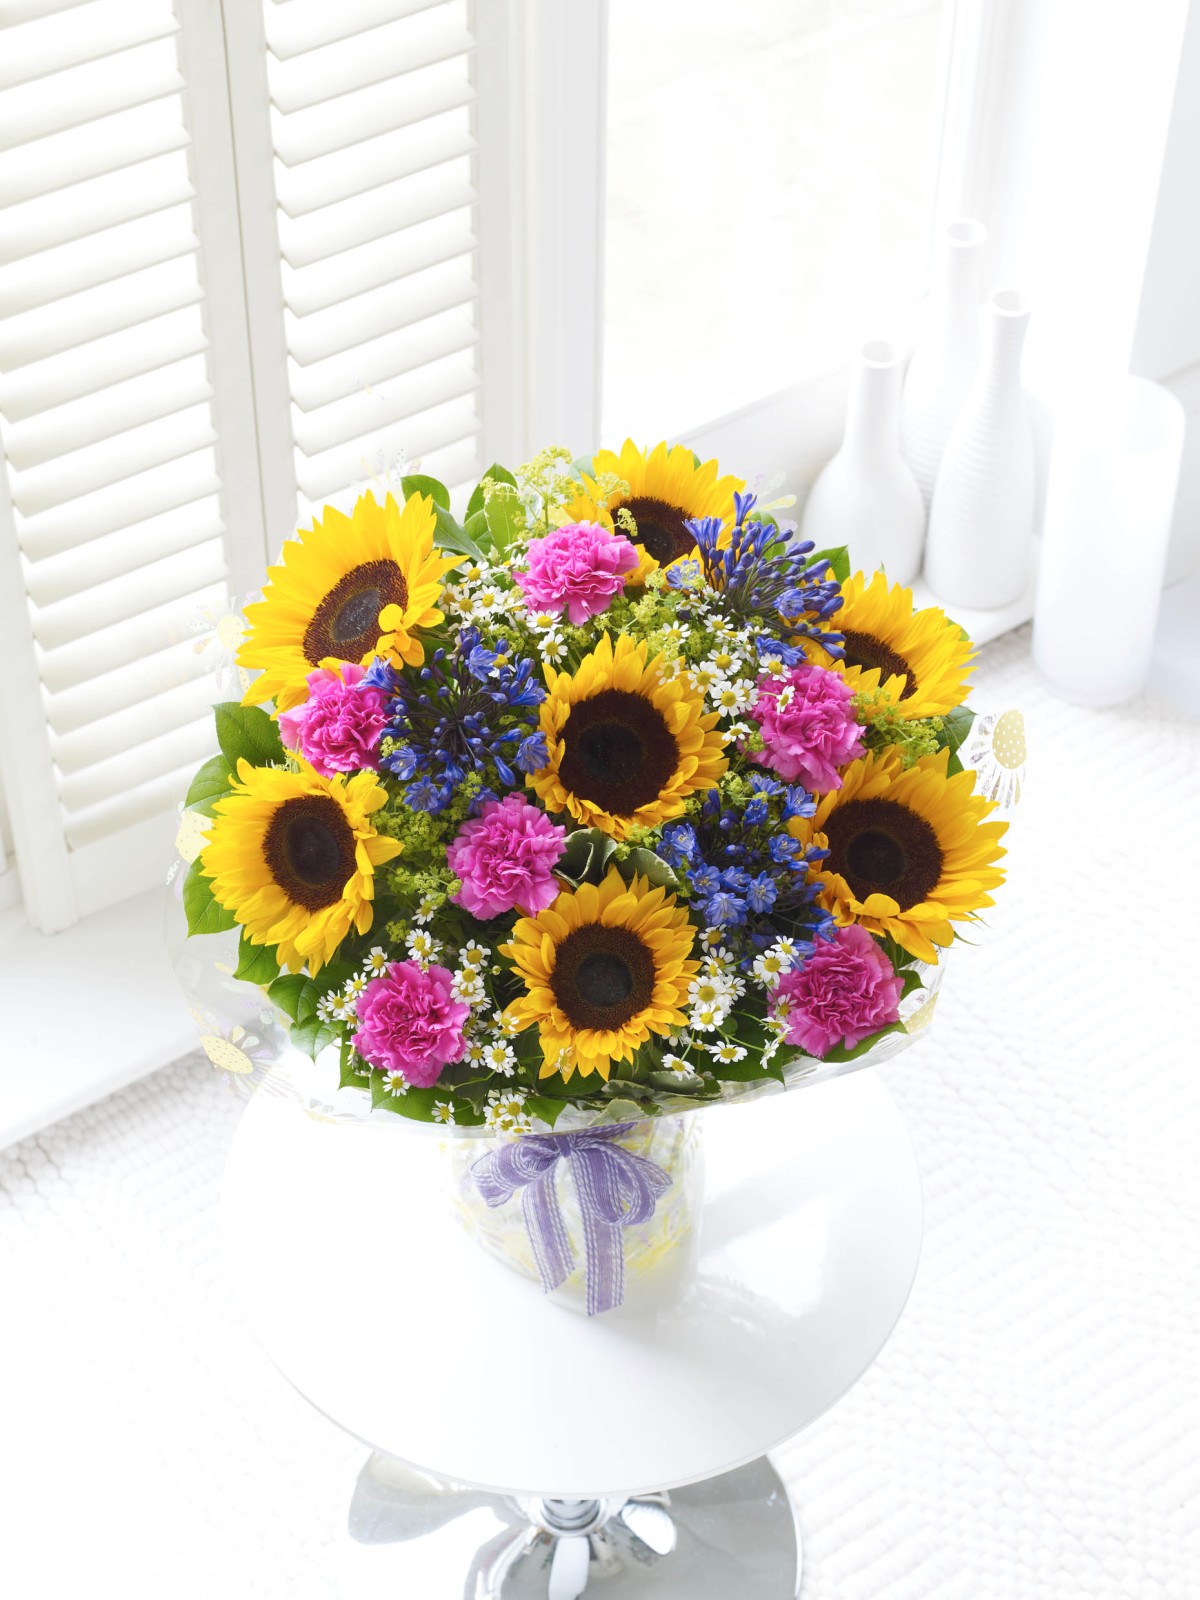 Sunflowers hand-tied bouquet of summer flowers